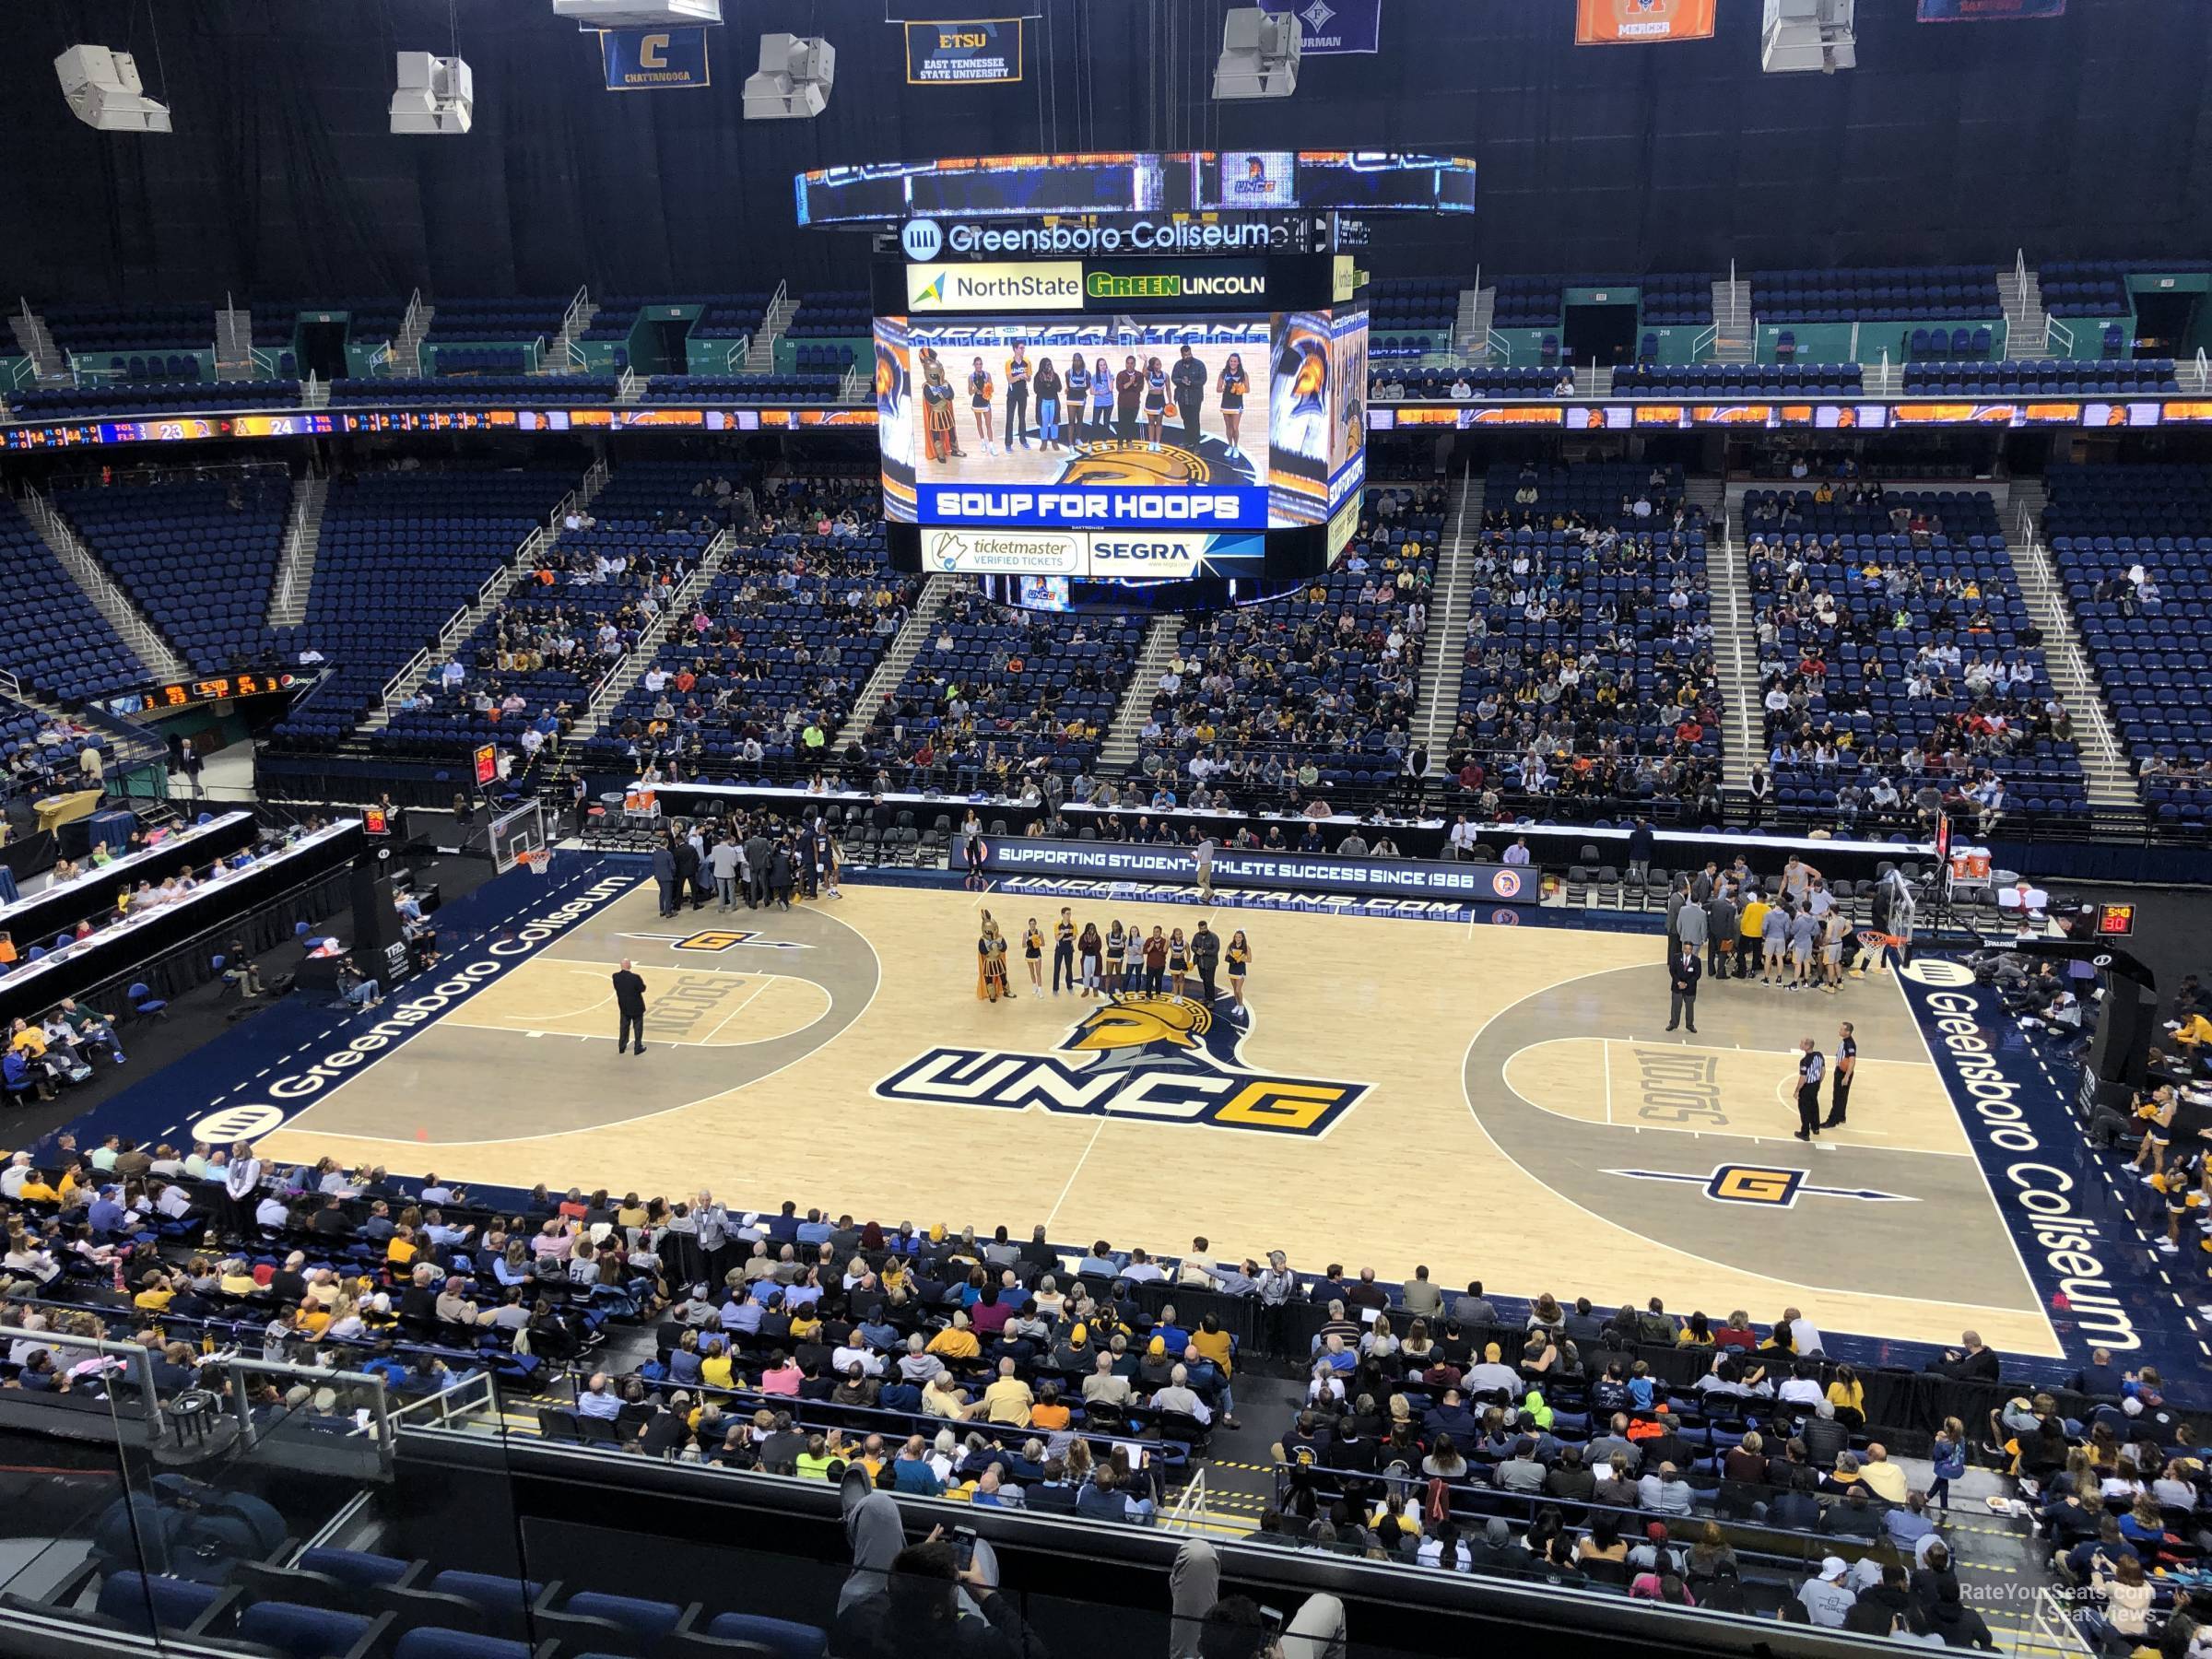 section 232, row g seat view  for basketball - greensboro coliseum